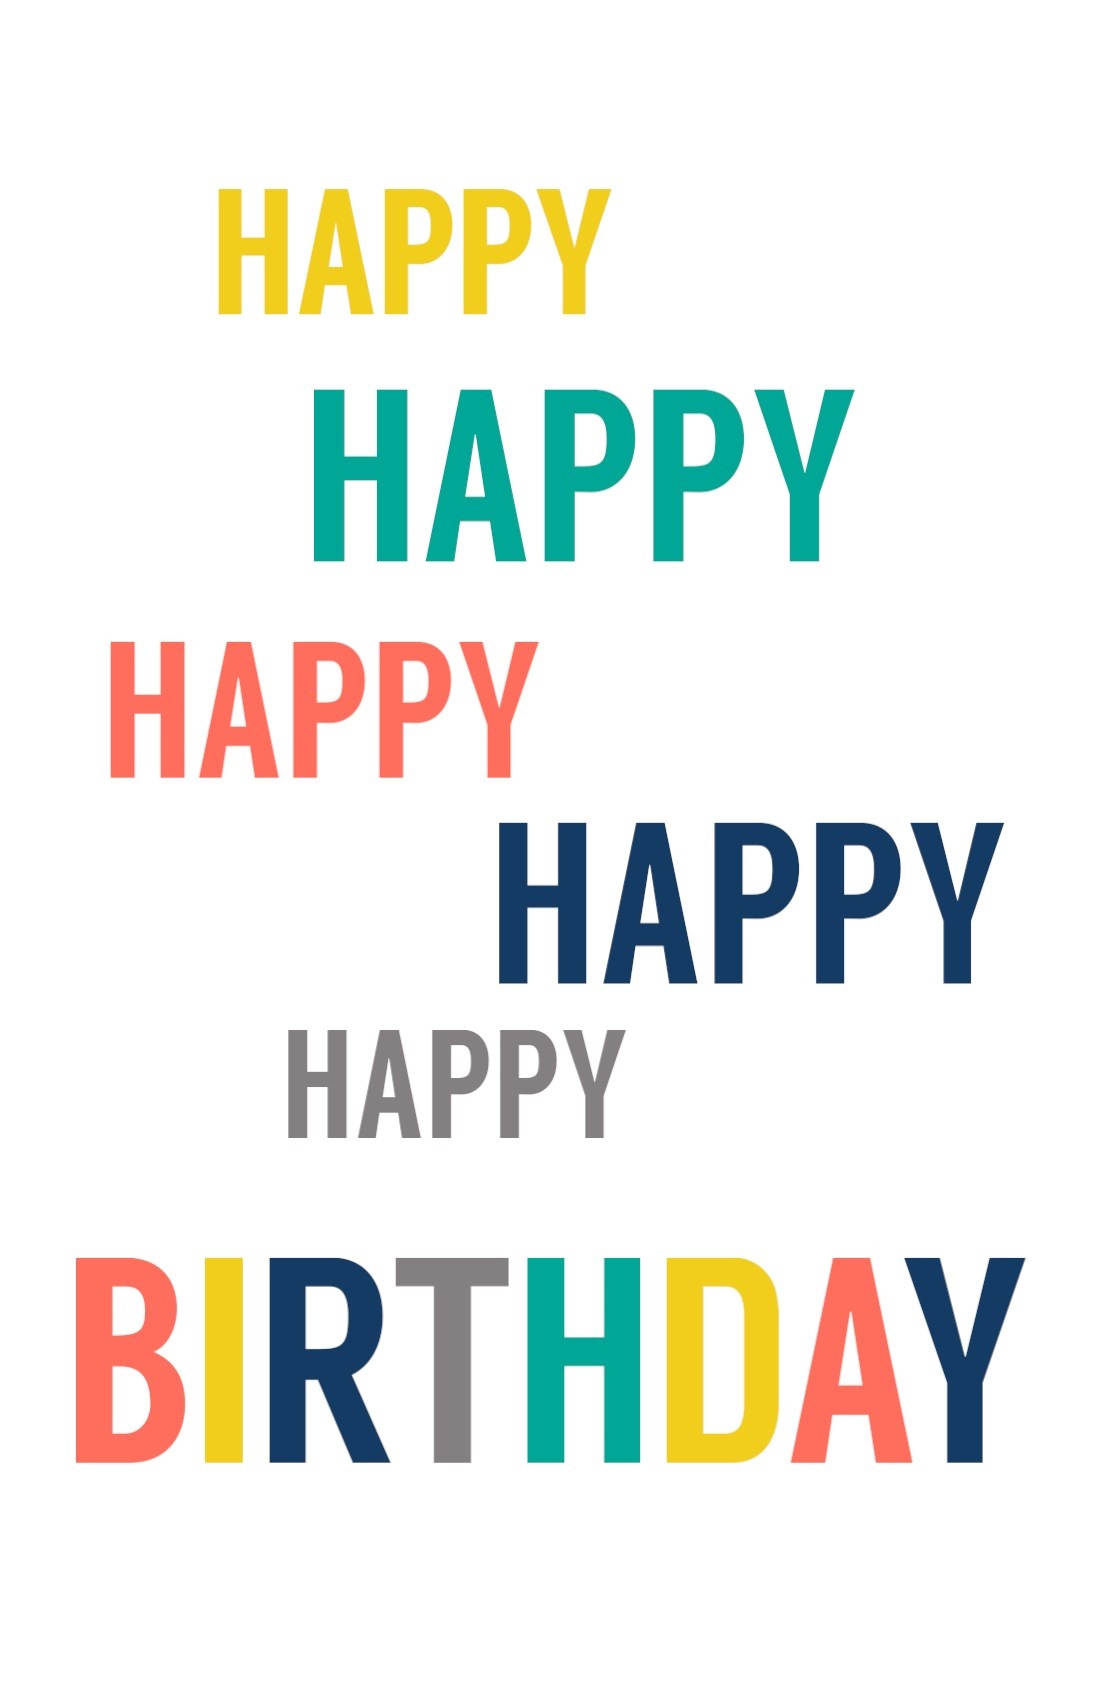 Free Printable Birthday Cards - Paper Trail Design - Free Printable Greeting Cards No Sign Up